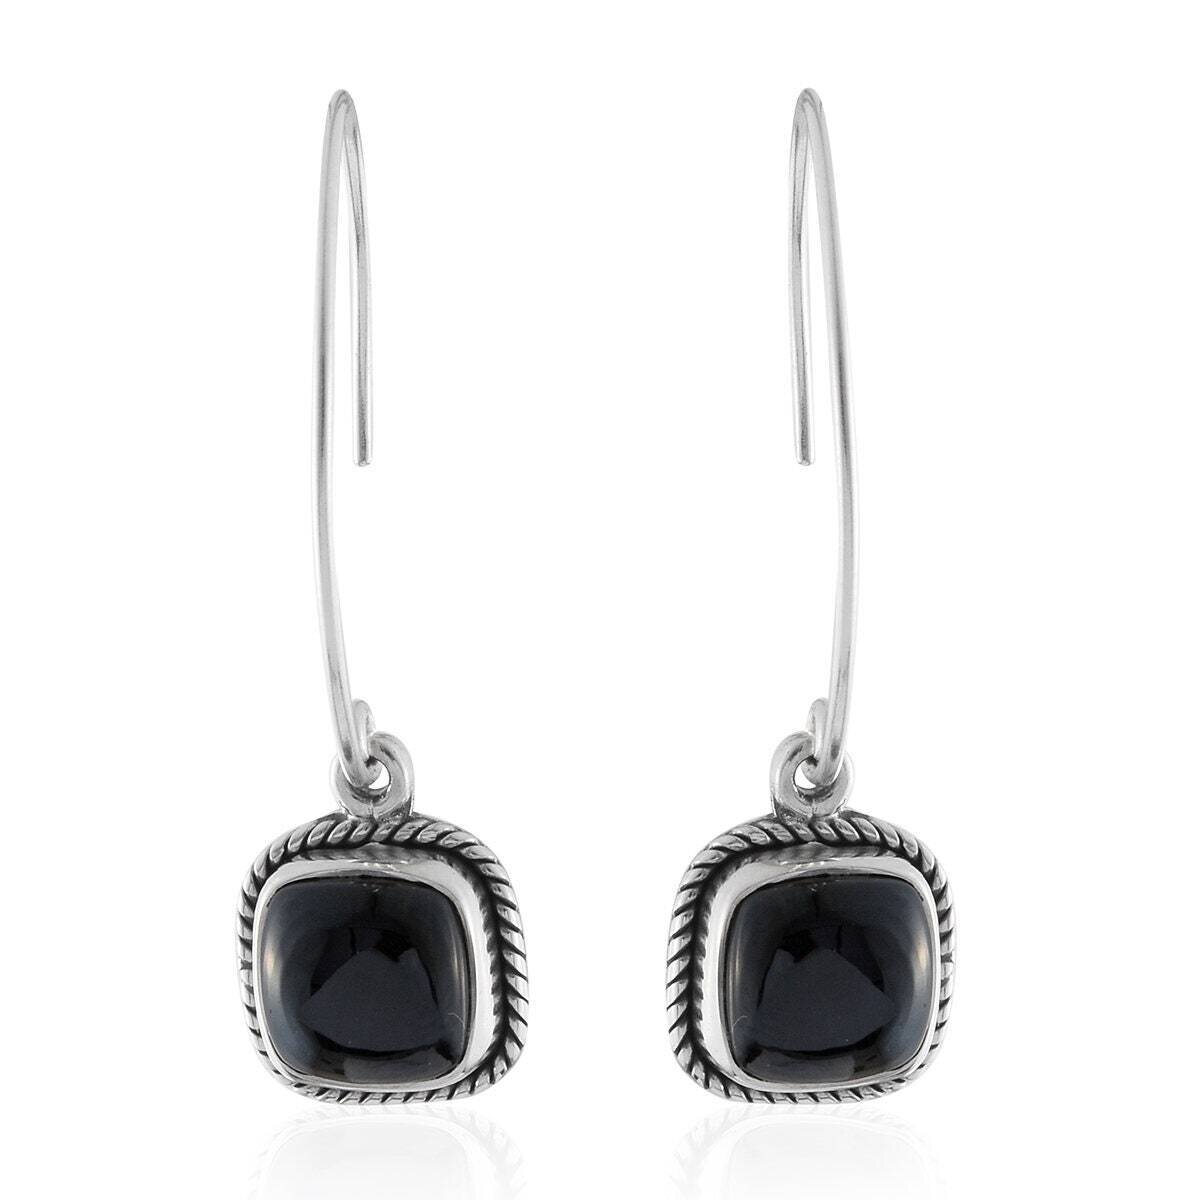 Natural Amazing Black Onyx Top Quality Gemstone Handcrafted Earring 925-Sterling Silver Earring Gift For Her Etsy Cyber Valentine's Day Gift